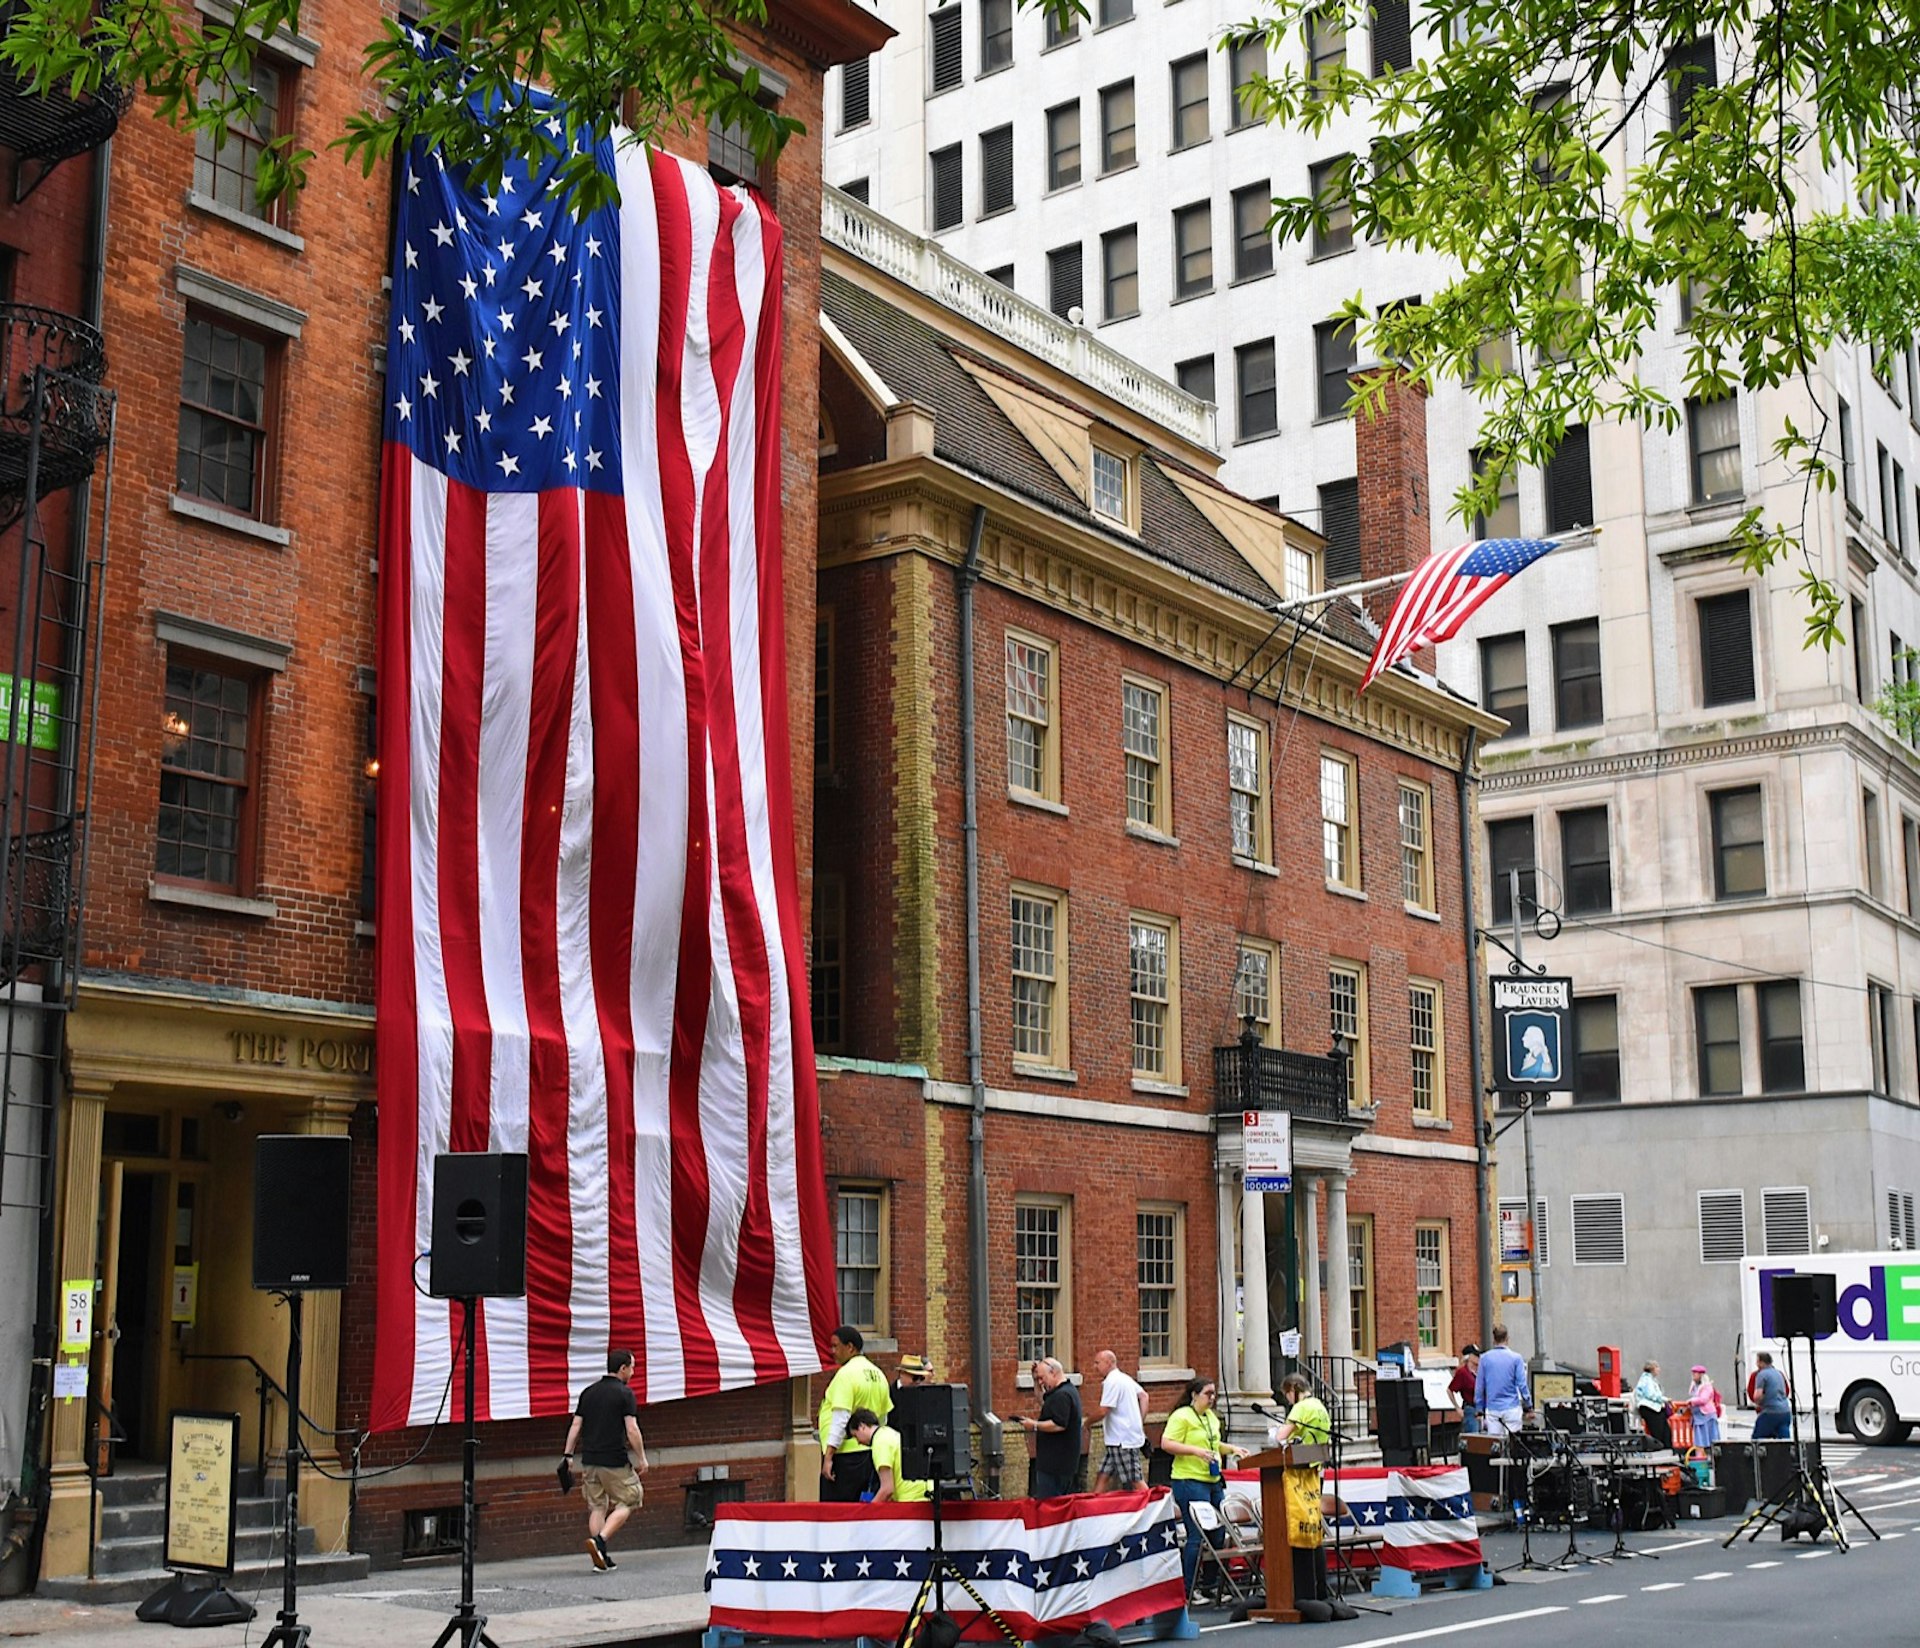 The historic brick building of the Fraunces Tavern is seen on a street corner in Manhattan, across the street from a skyscraper. A giant American Flag is hung across the facade of the building next door and a band sets up to perform outside the tavern